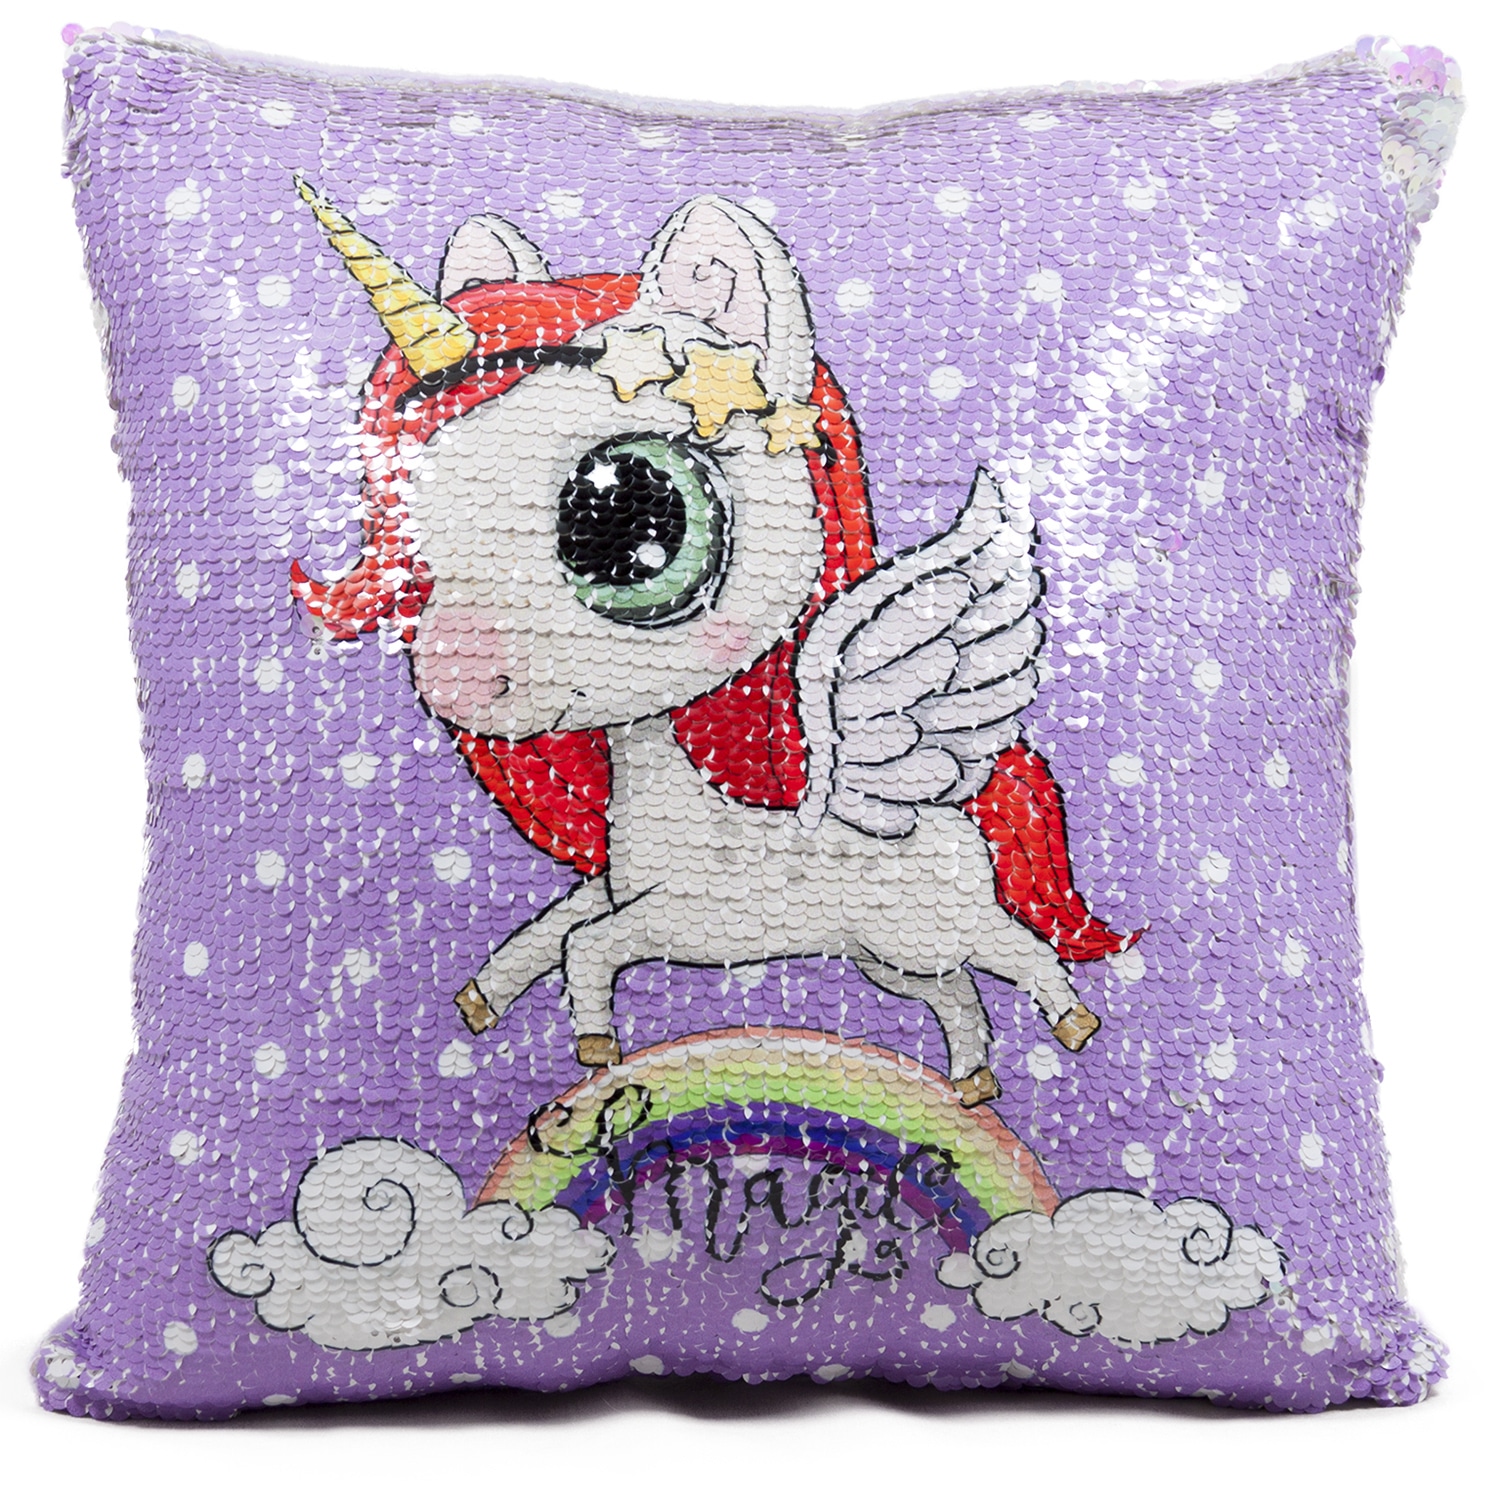 Pillow with unicorn and sequins